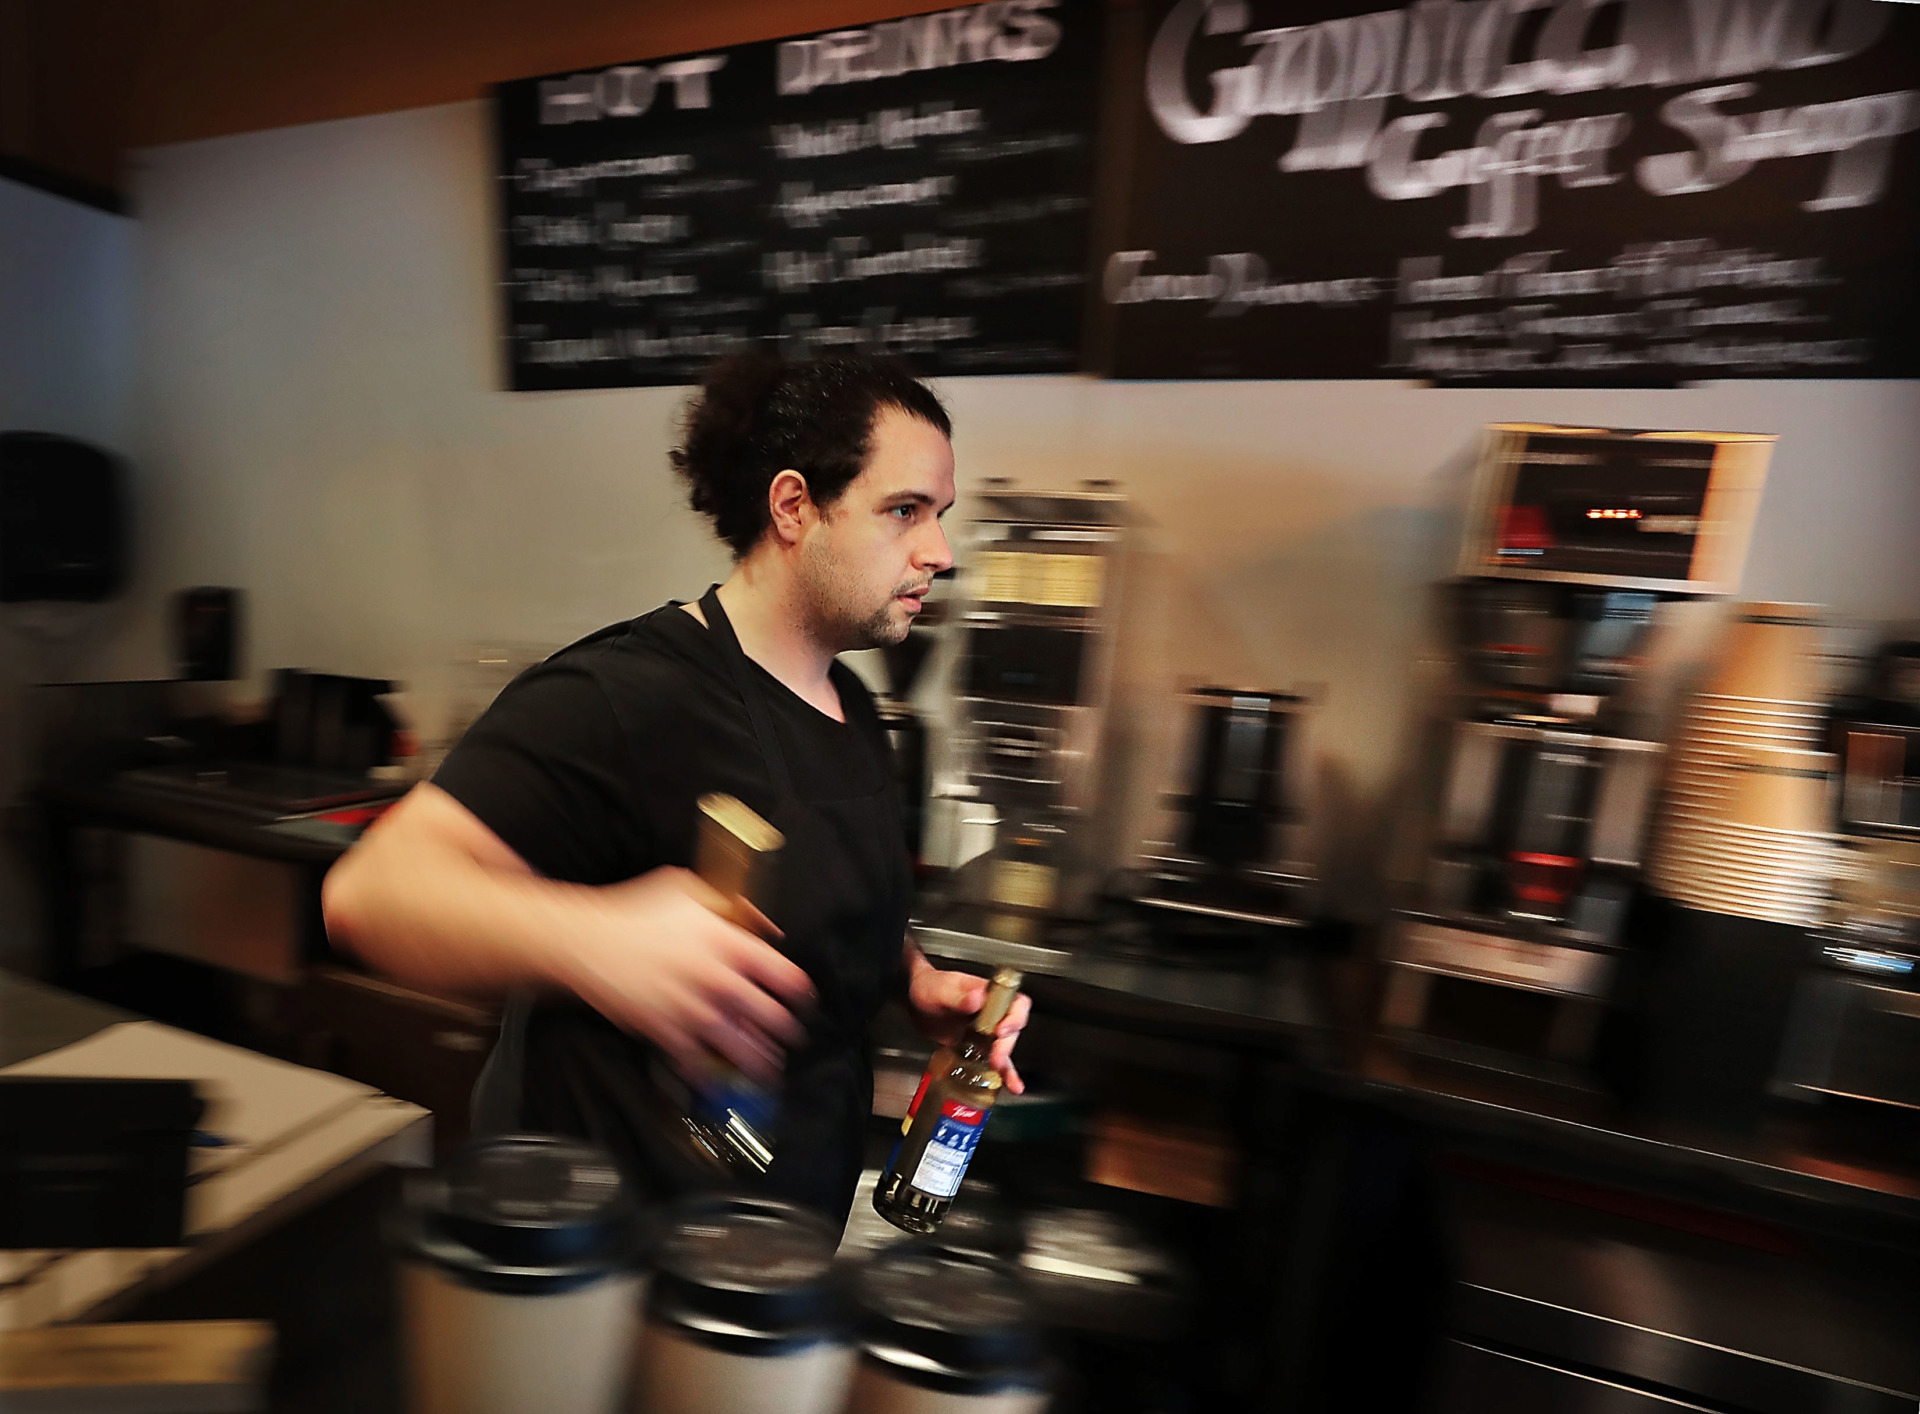 <strong>Barista Zach Rhadfi stocks up the bar at Cappuccino coffee shop in Germantown on Wednesday, Feb. 6. Cappuccino's new owner, Rick Brenneman, is trying to take his newly acquired business in a different direction.&nbsp;In early January, he reached out through Facebook, and asked the community how he could improve the shop. More than 250 responses came in, ranging from changing the menu to changing the interior.&nbsp;</strong>(Jim Weber/Daily Memphian)